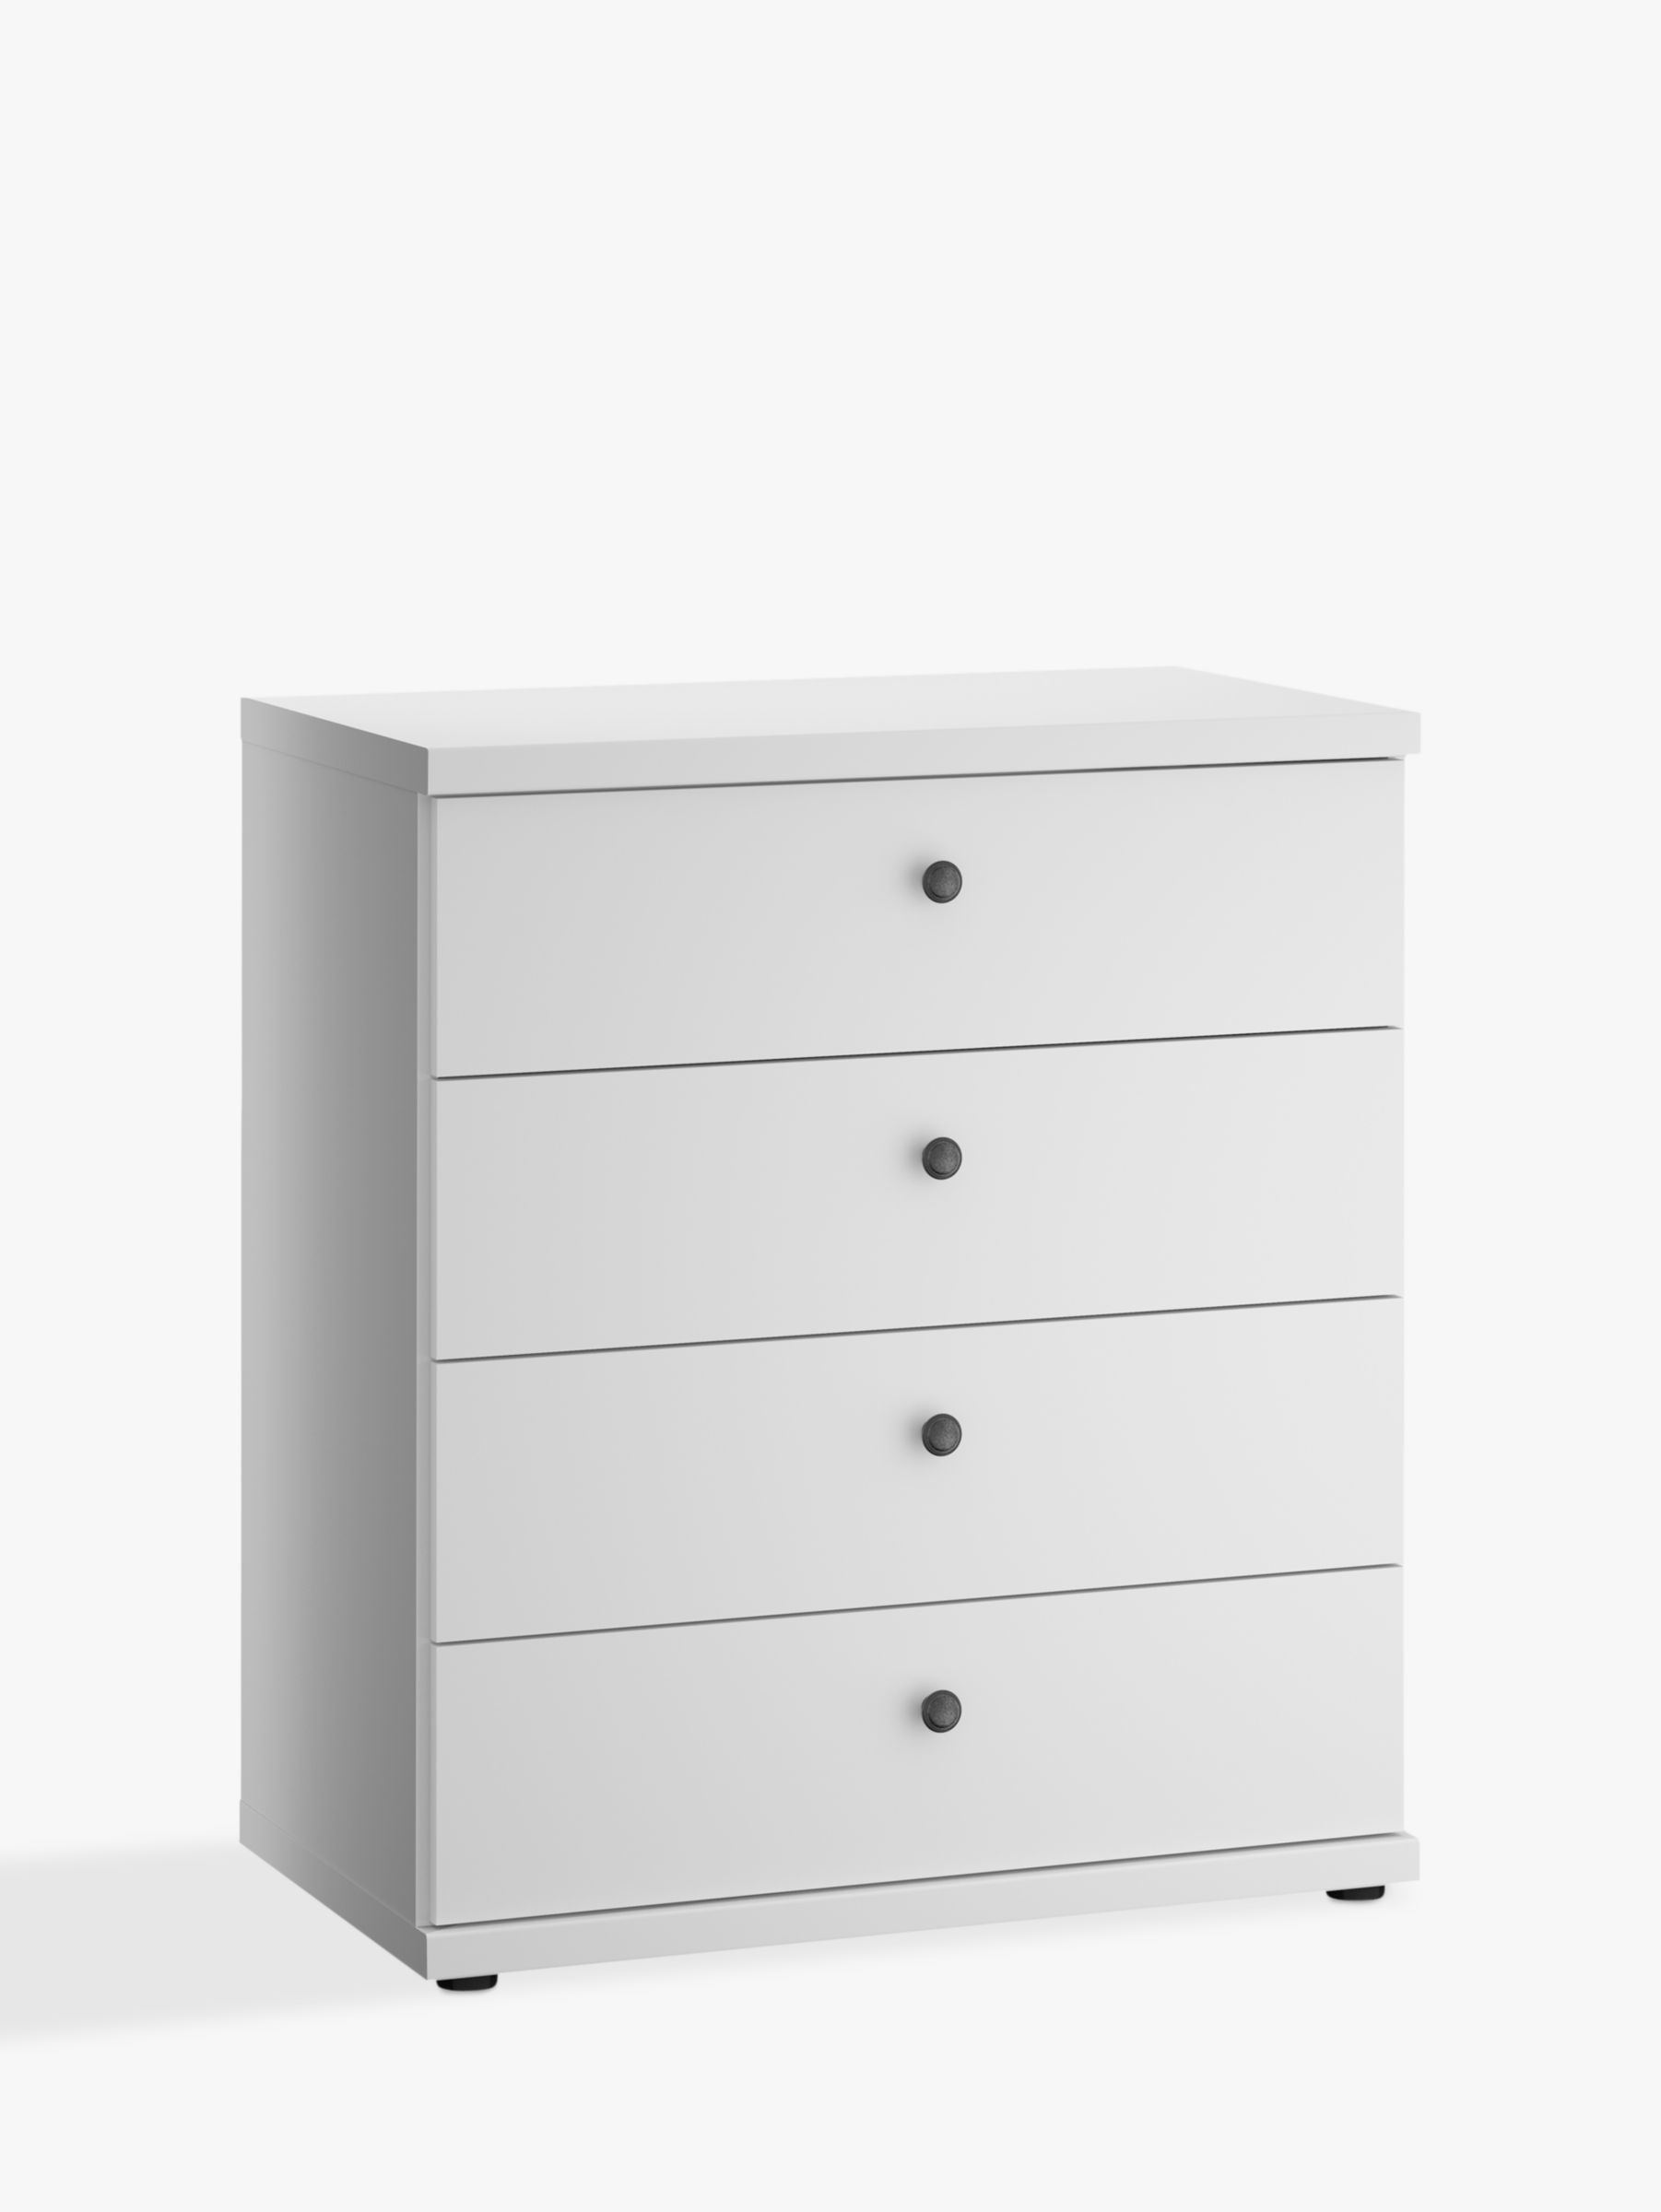 Photo of John lewis marlow 4 drawer chest 75cm